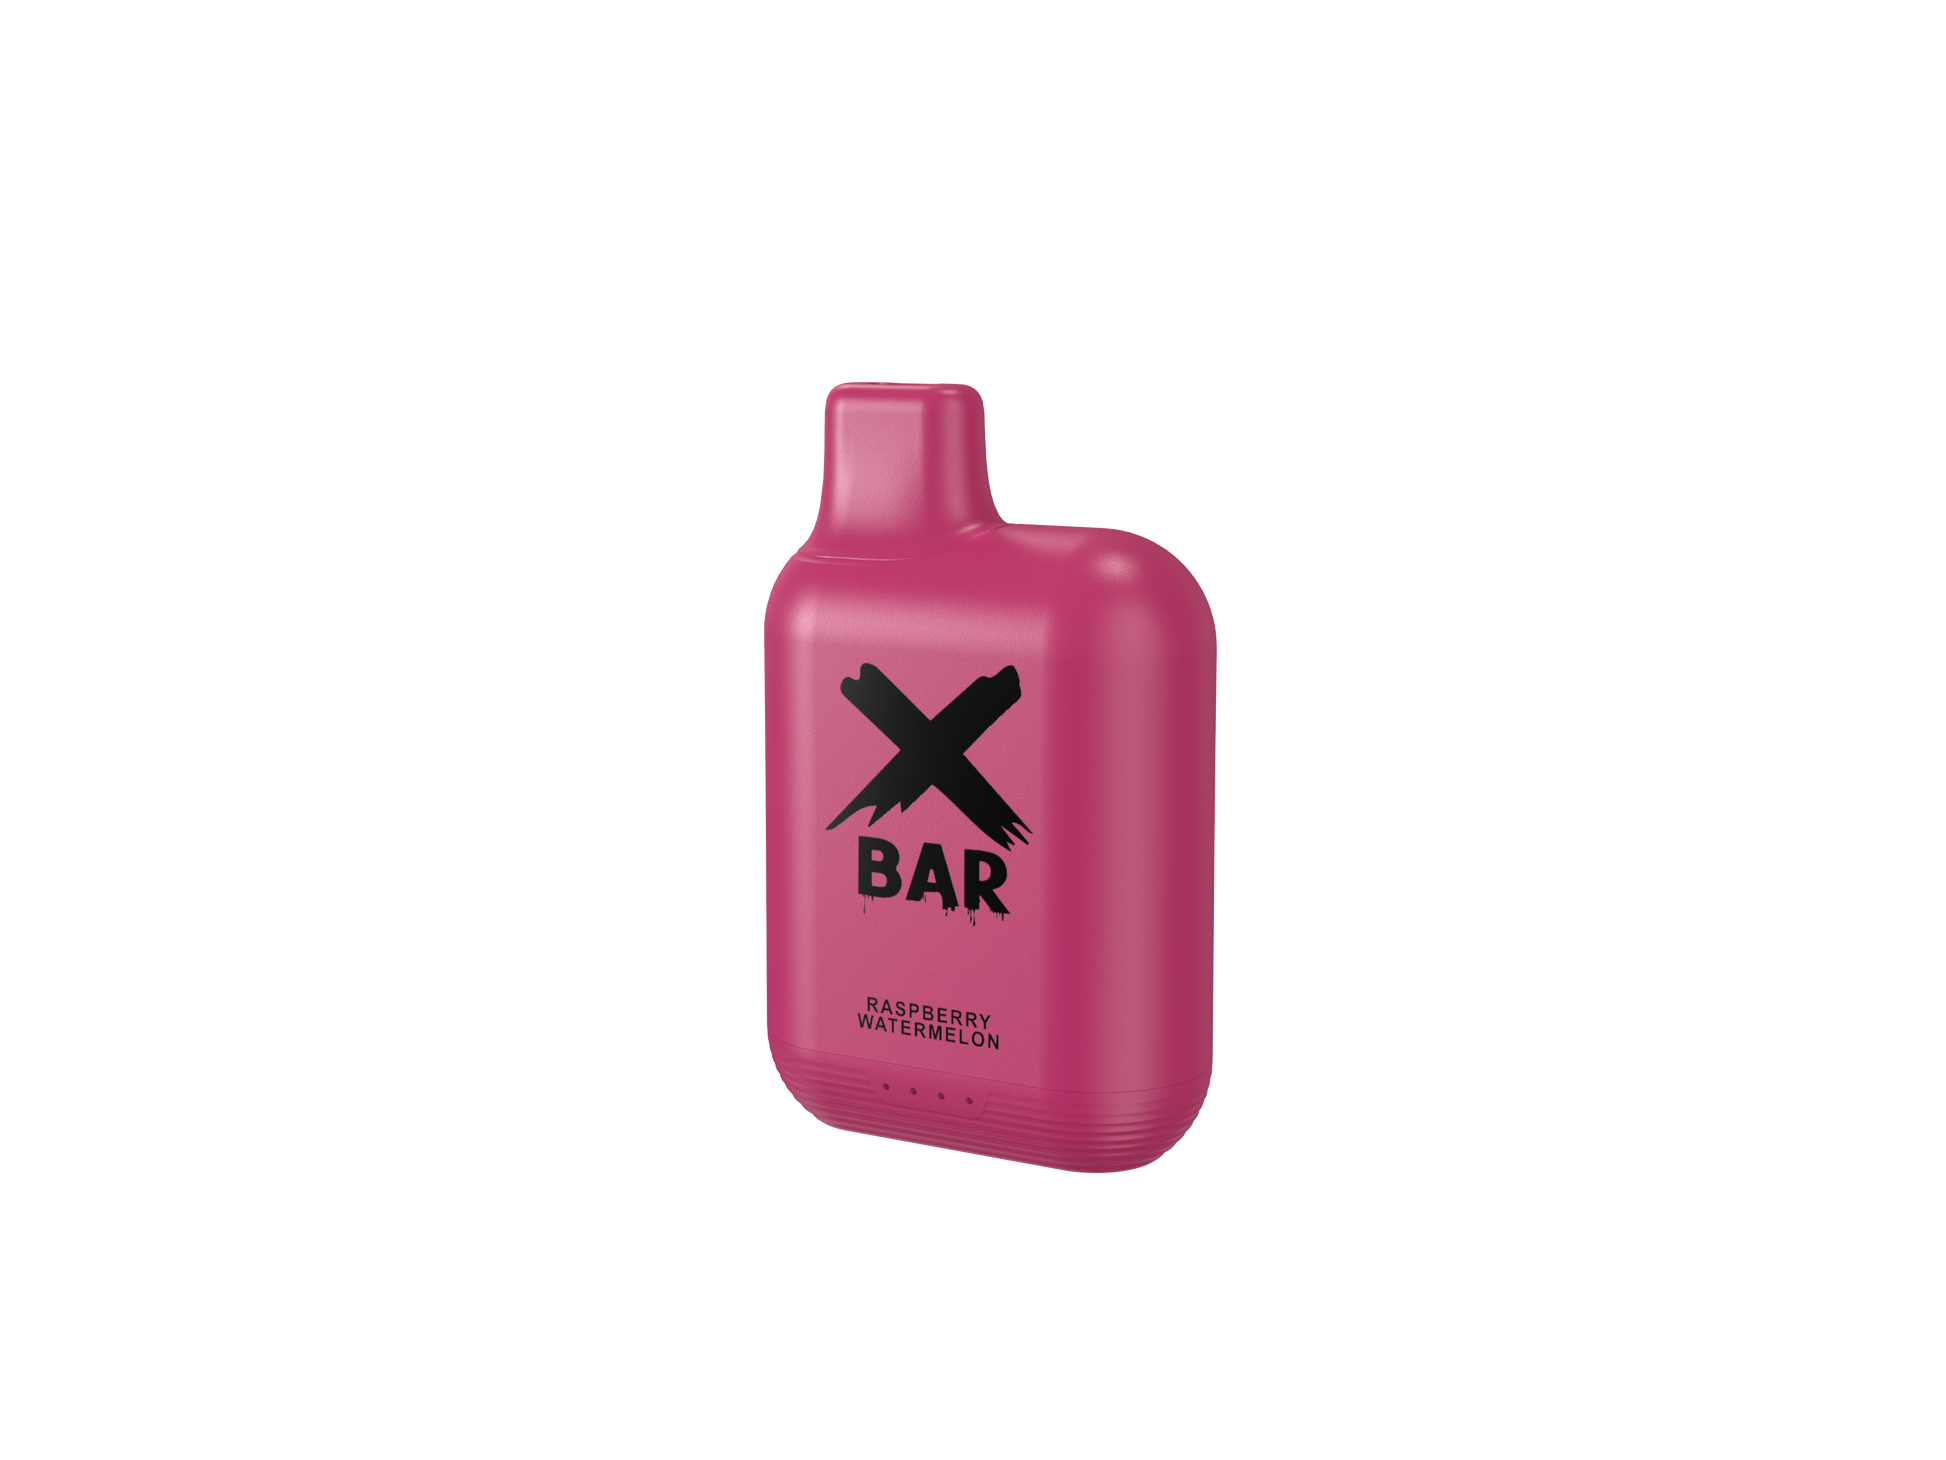 Raspberry Watermelon Flavored by Xbar Vapes